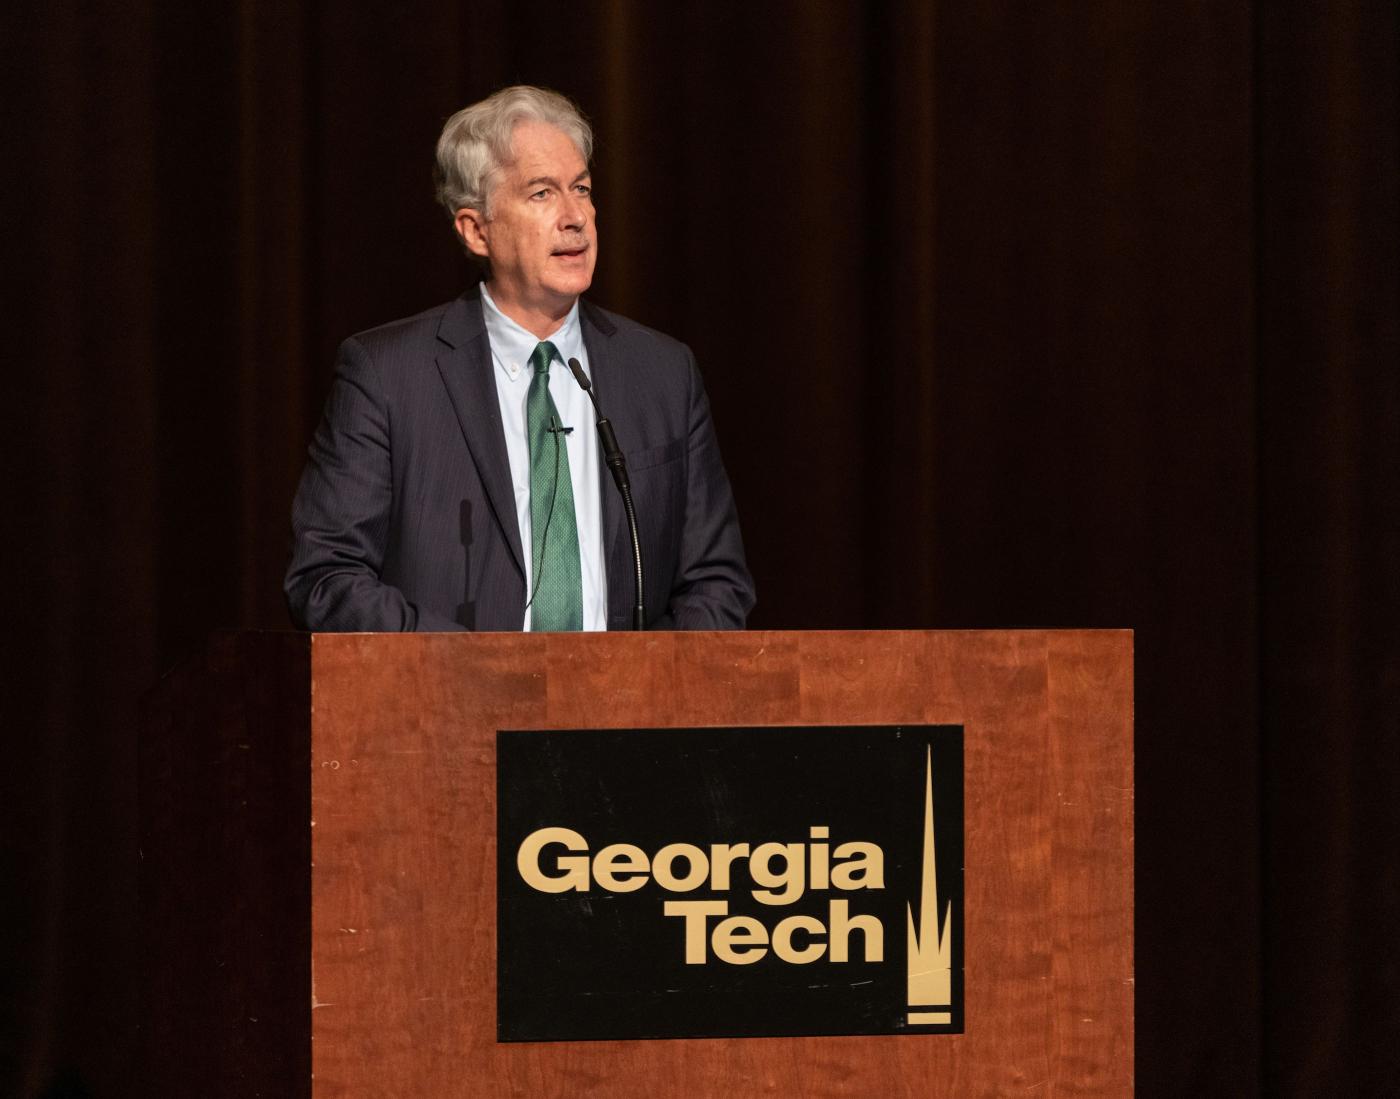 William Burns stands at a lectern with the Georgia Tech logo on it and addresses an audience.